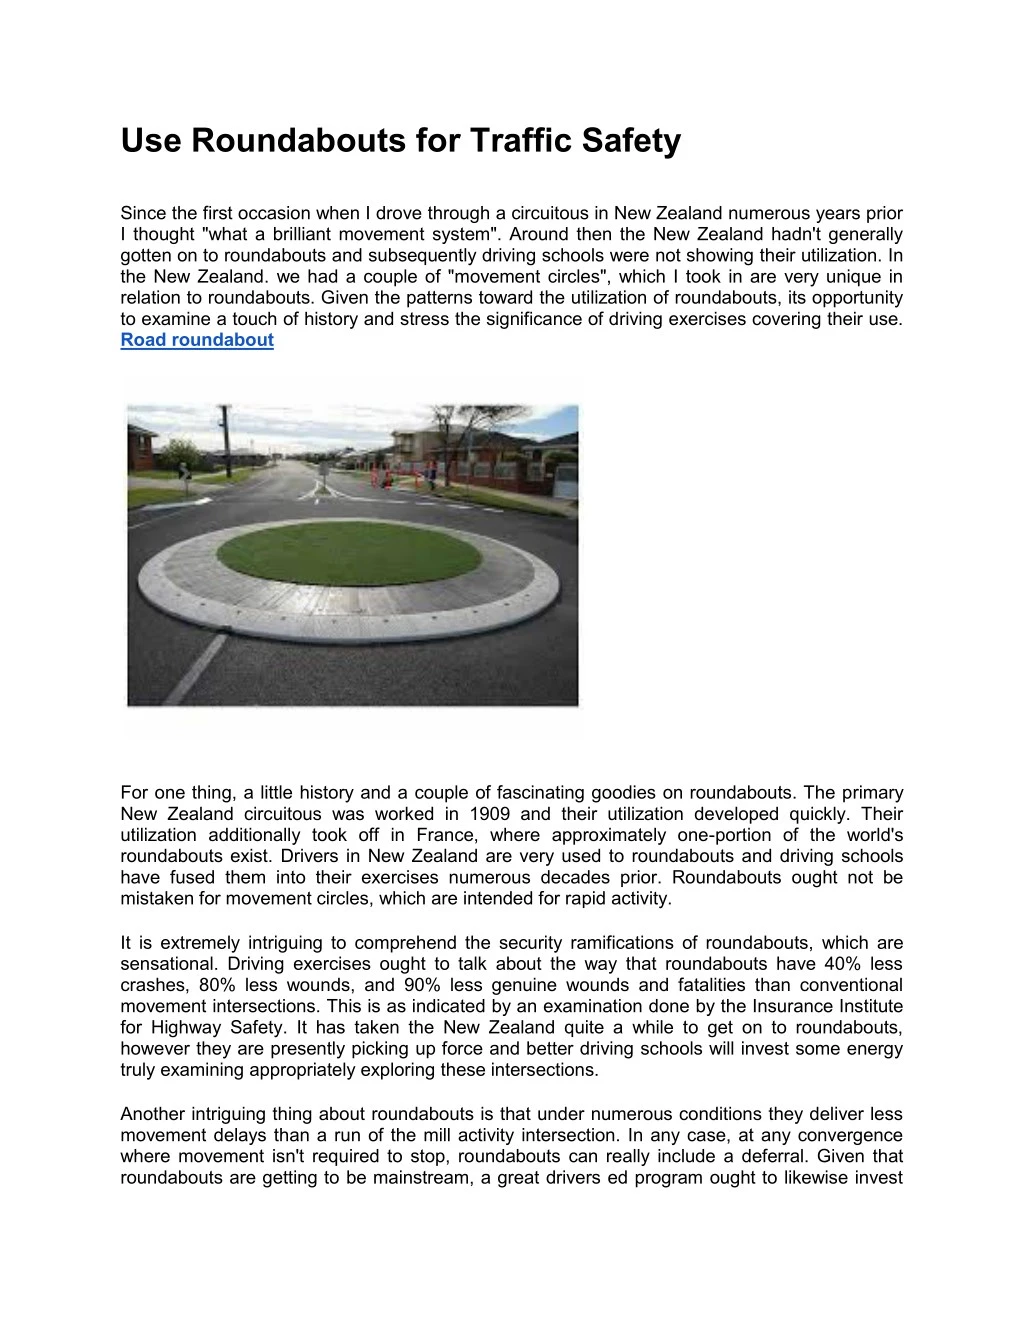 use roundabouts for traffic safety